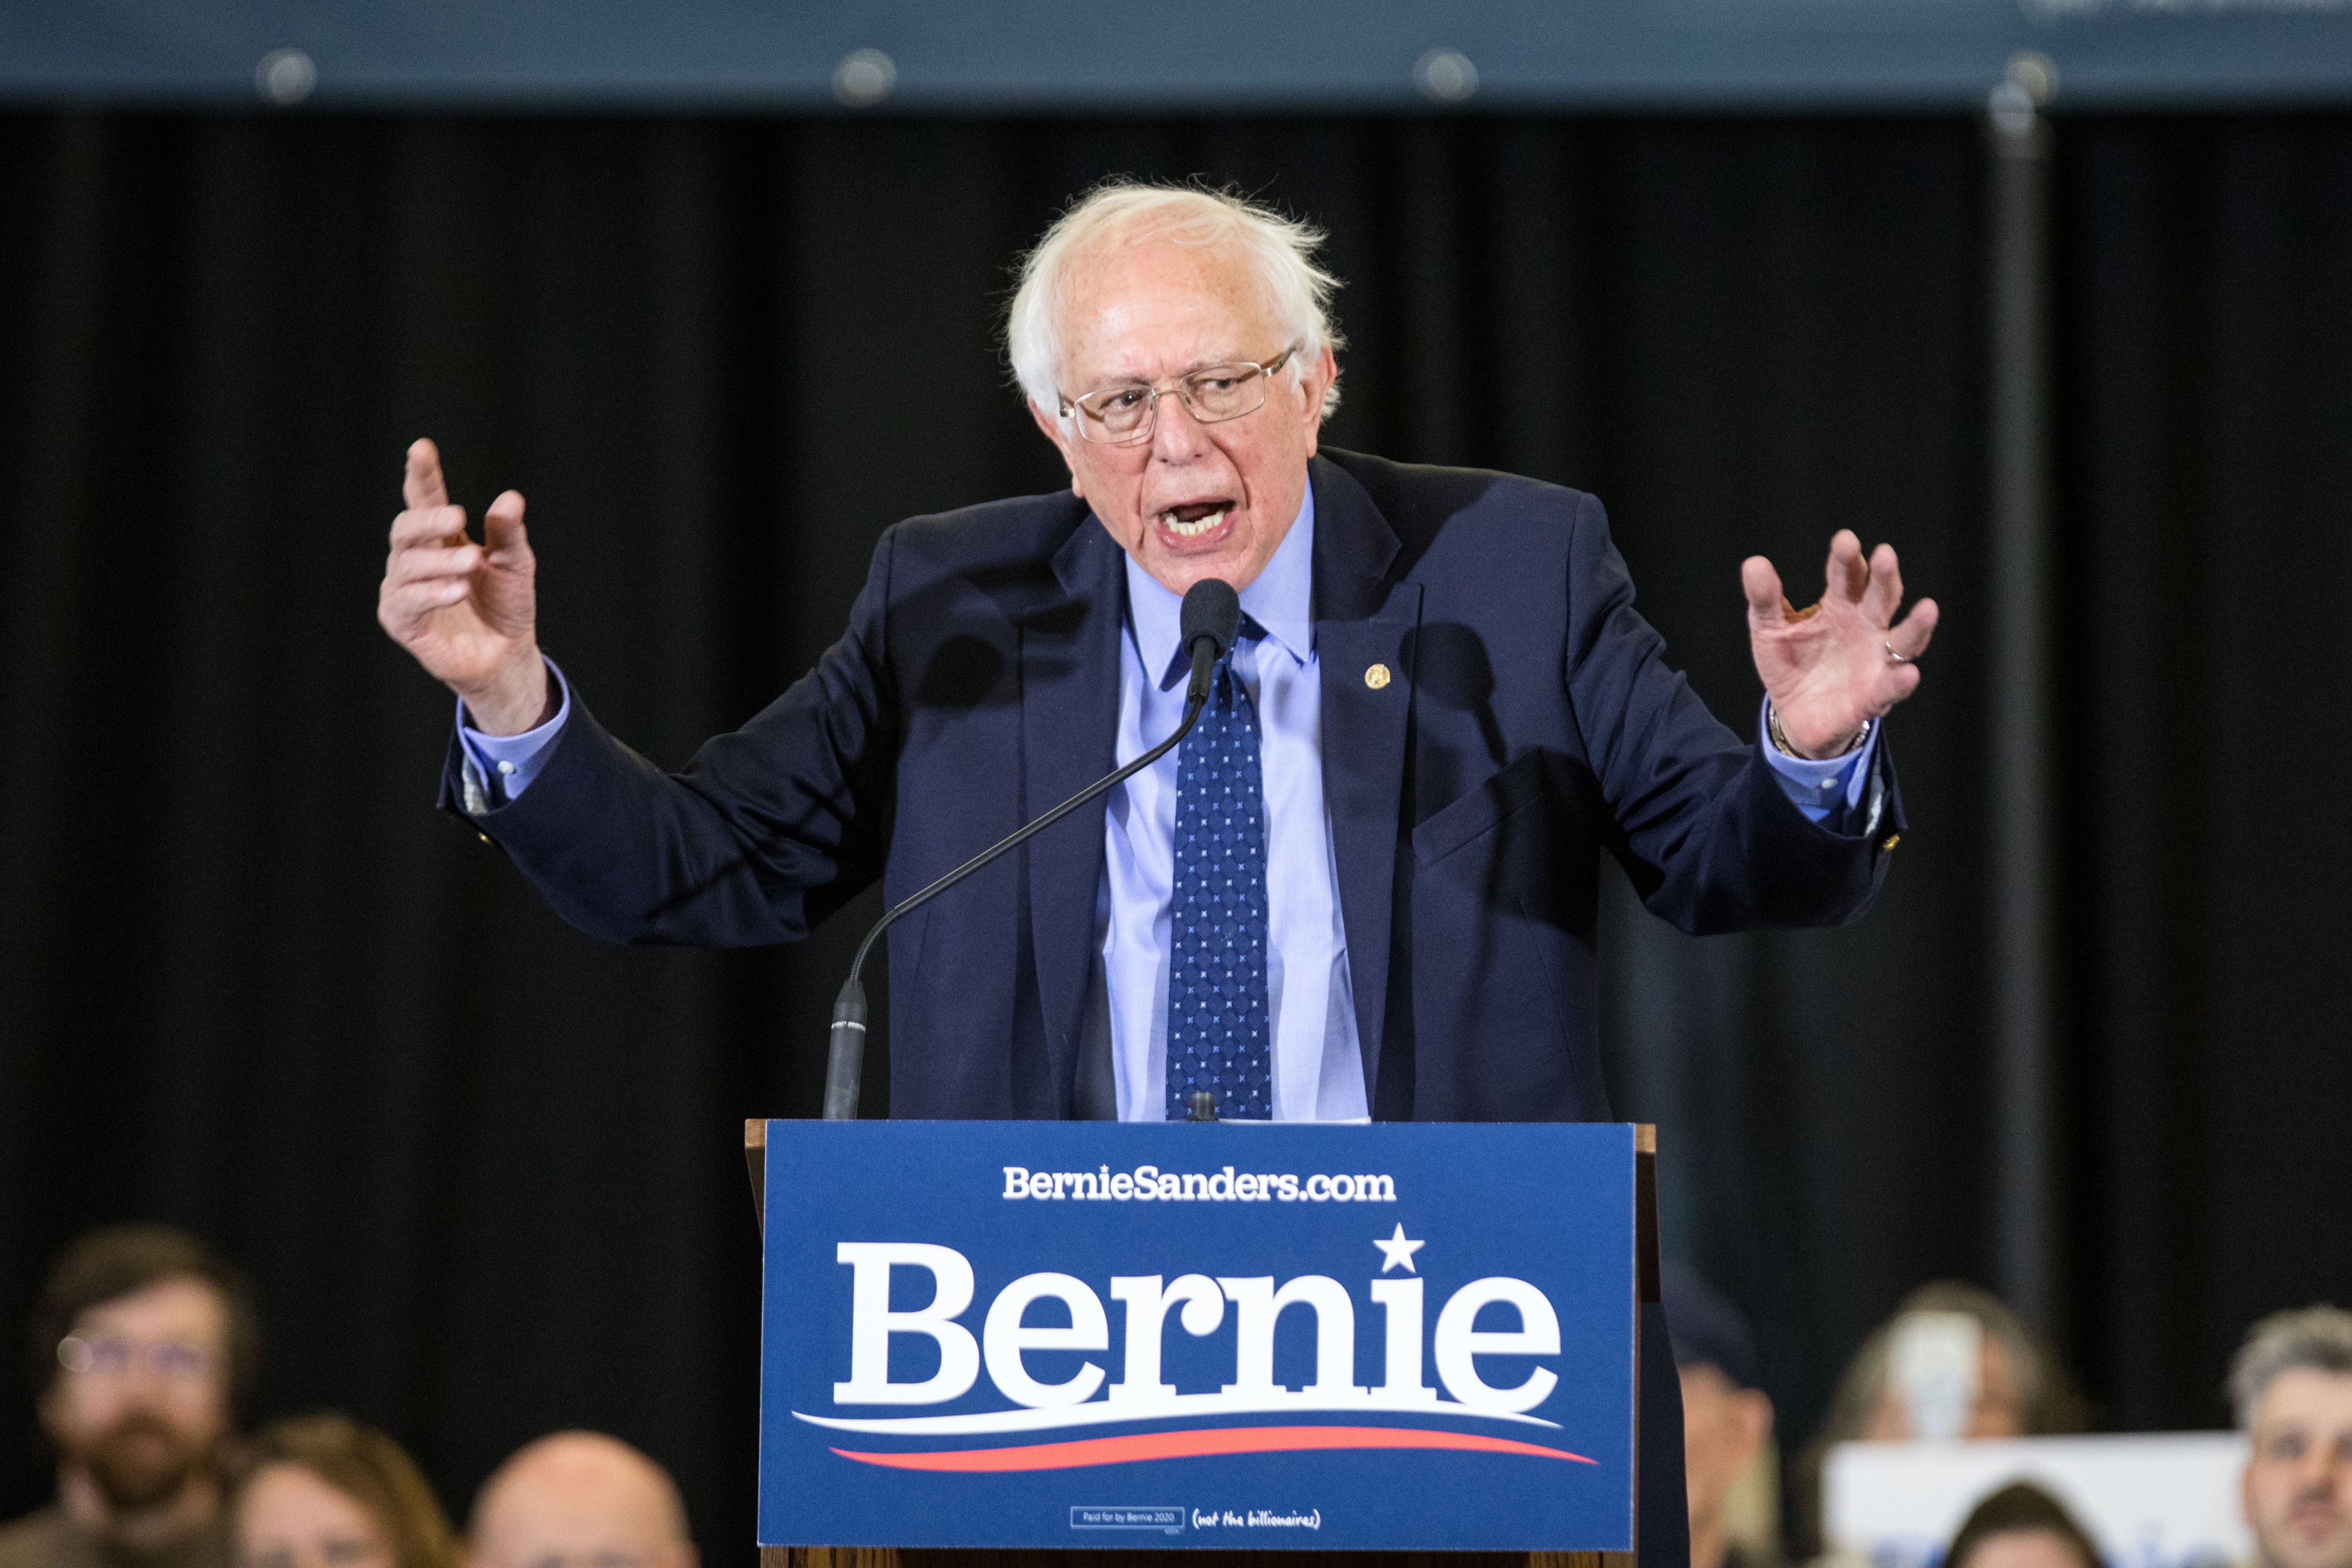 2020 Democratic presidential candidate U.S. Sen. Bernie Sanders (I-VT) speaks during his first New Hampshire campaign event on March 10, 2019 in Concord, New Hampshire. (Scott Eisen—Getty Images)